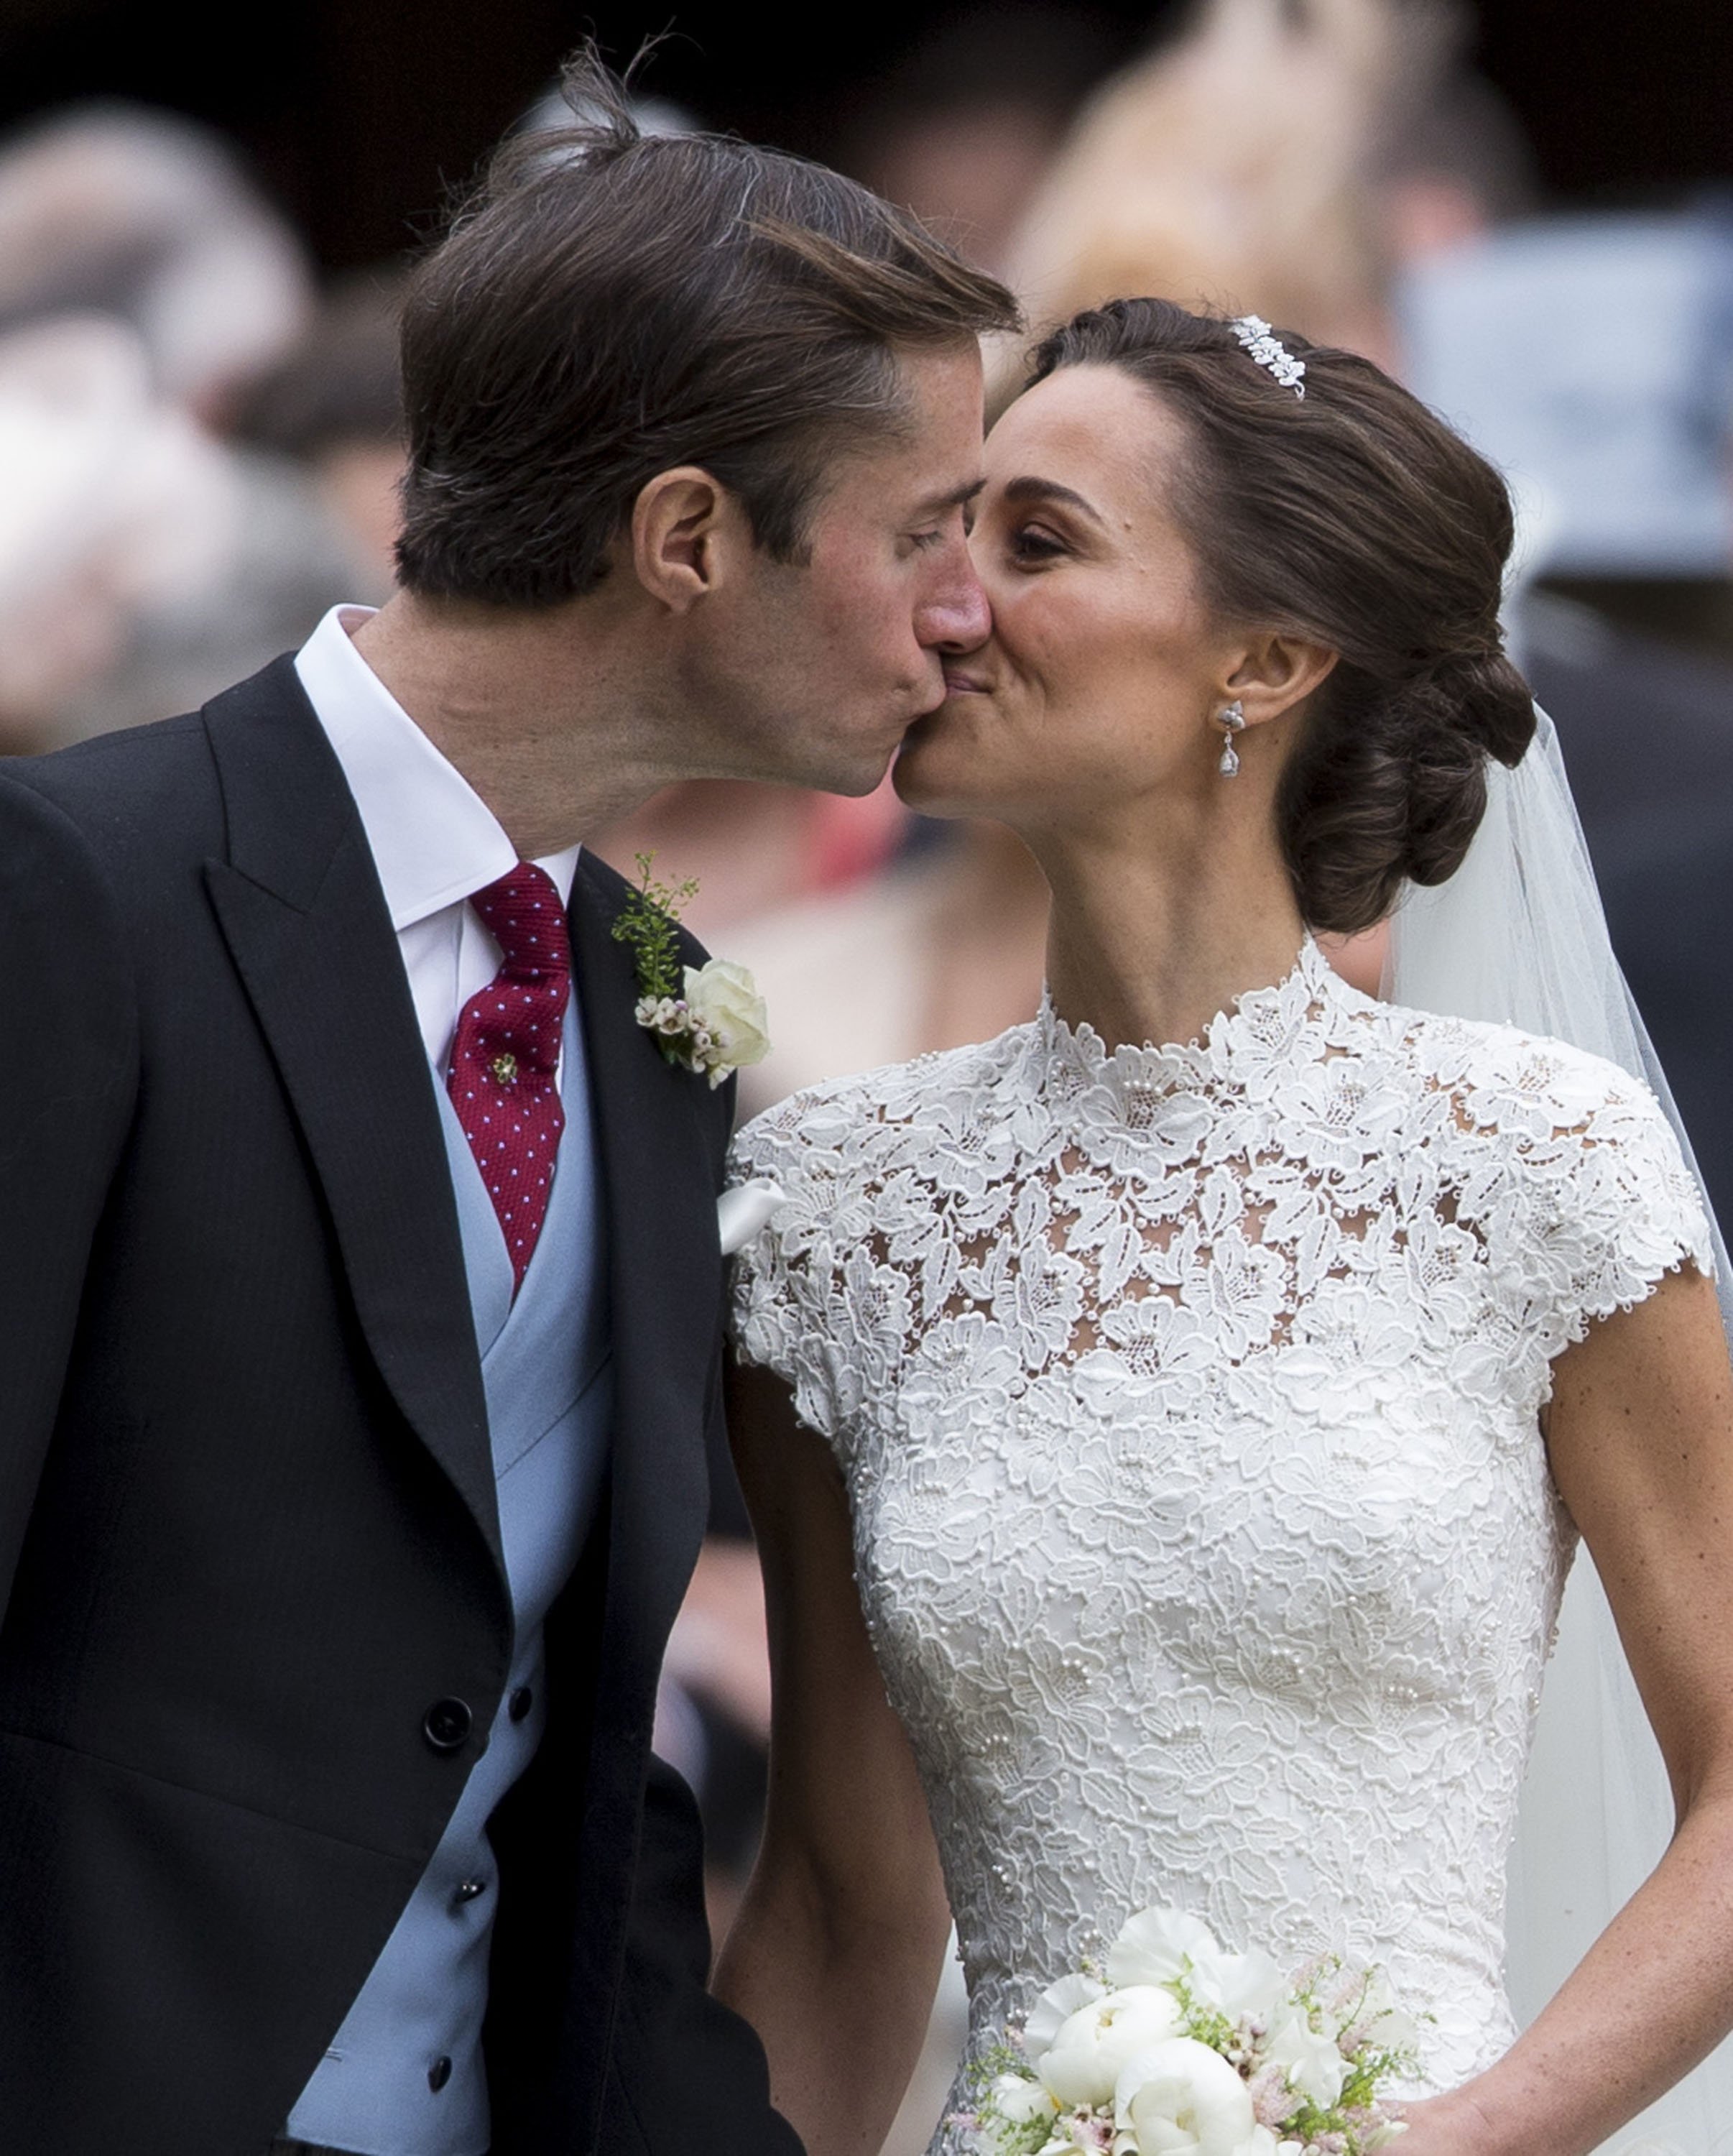 James Matthews and Pippa Middleton after their wedding at St Mark's Church on May 20, 2017 in Englefield Green, England | Source: Getty Images